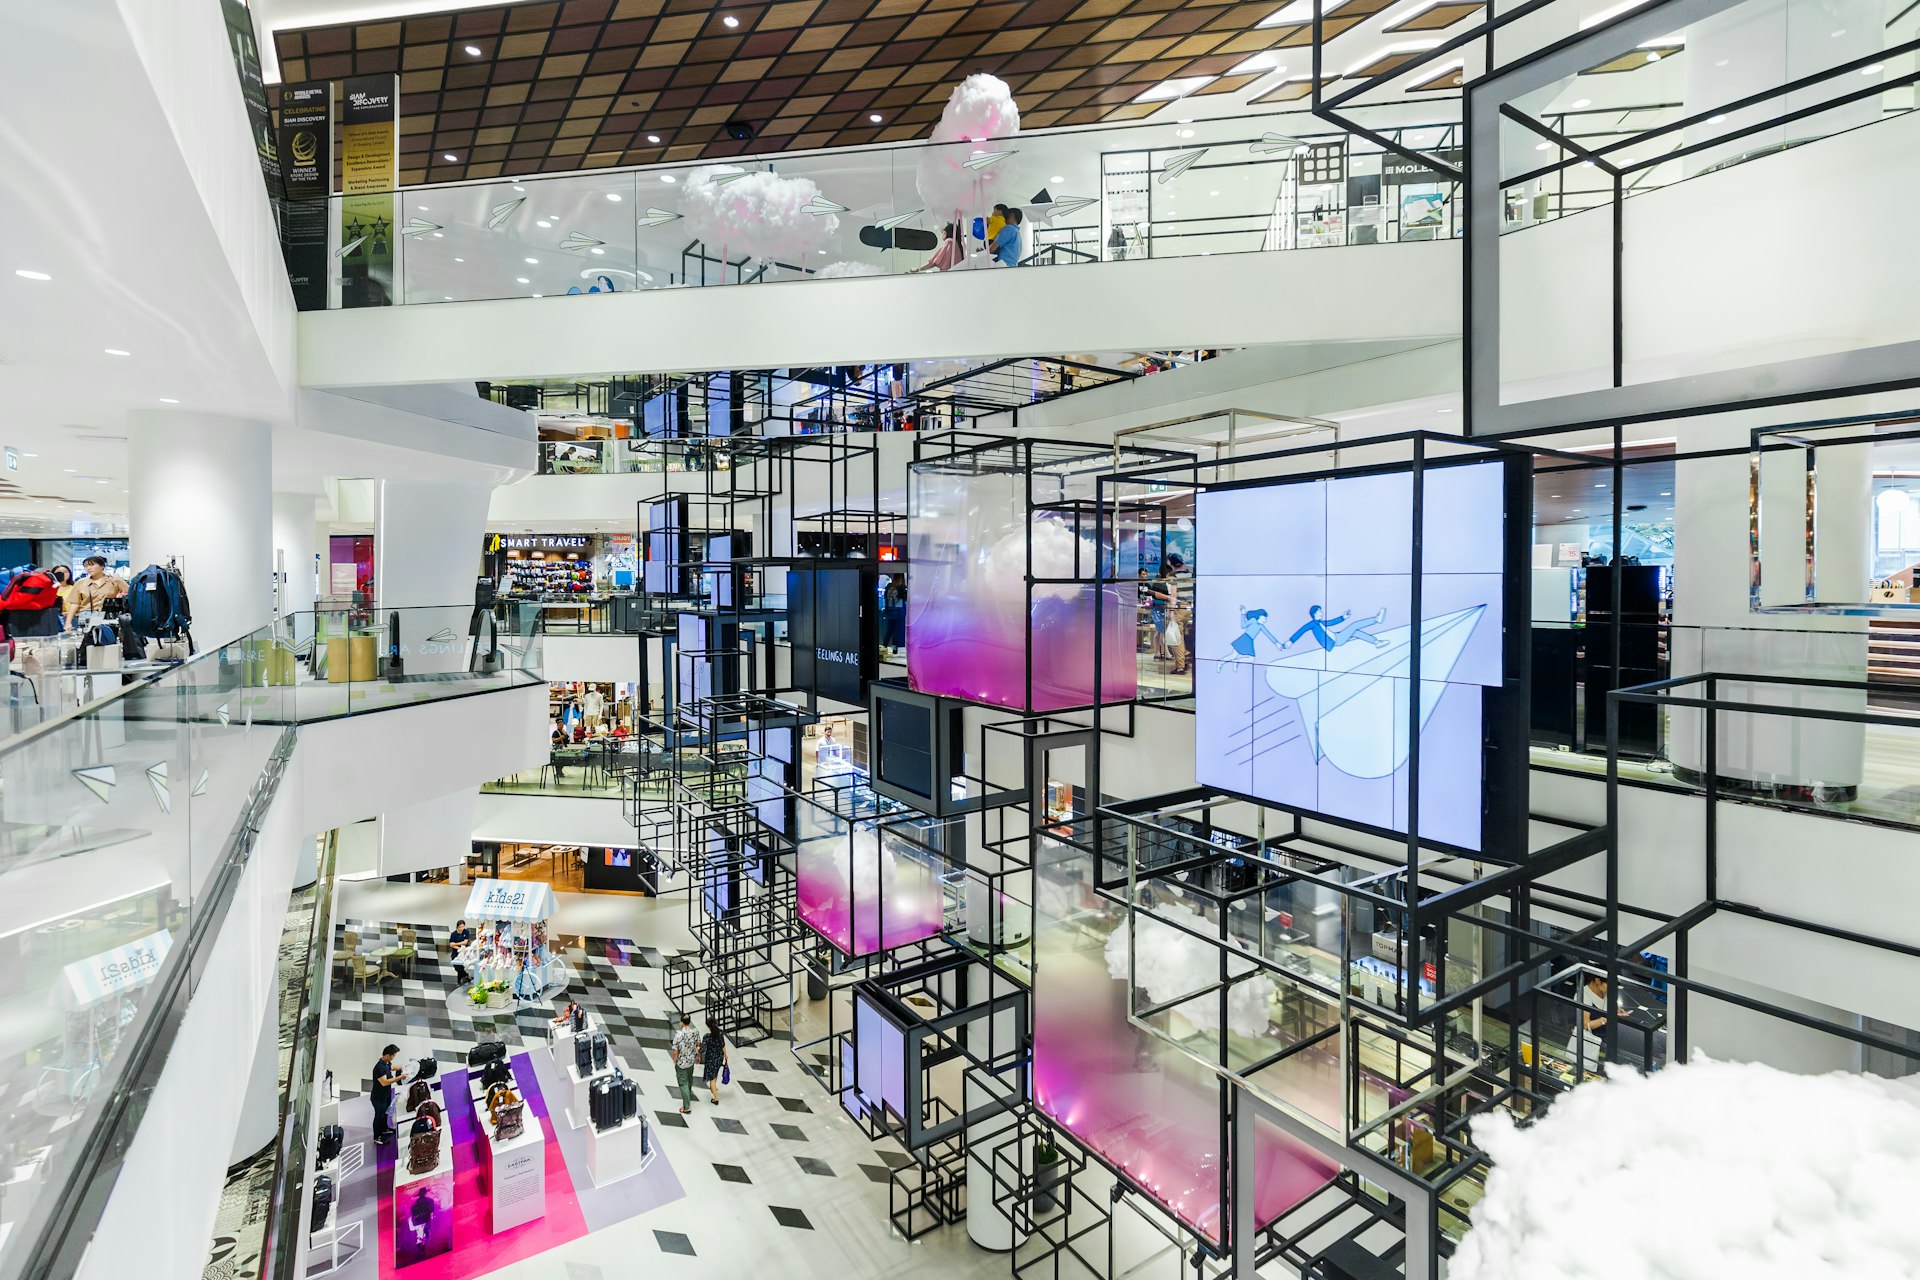 The white gleaming modern interior design of Siam Discovery Shopping Mall in Bangkok spread across two levels of shops.